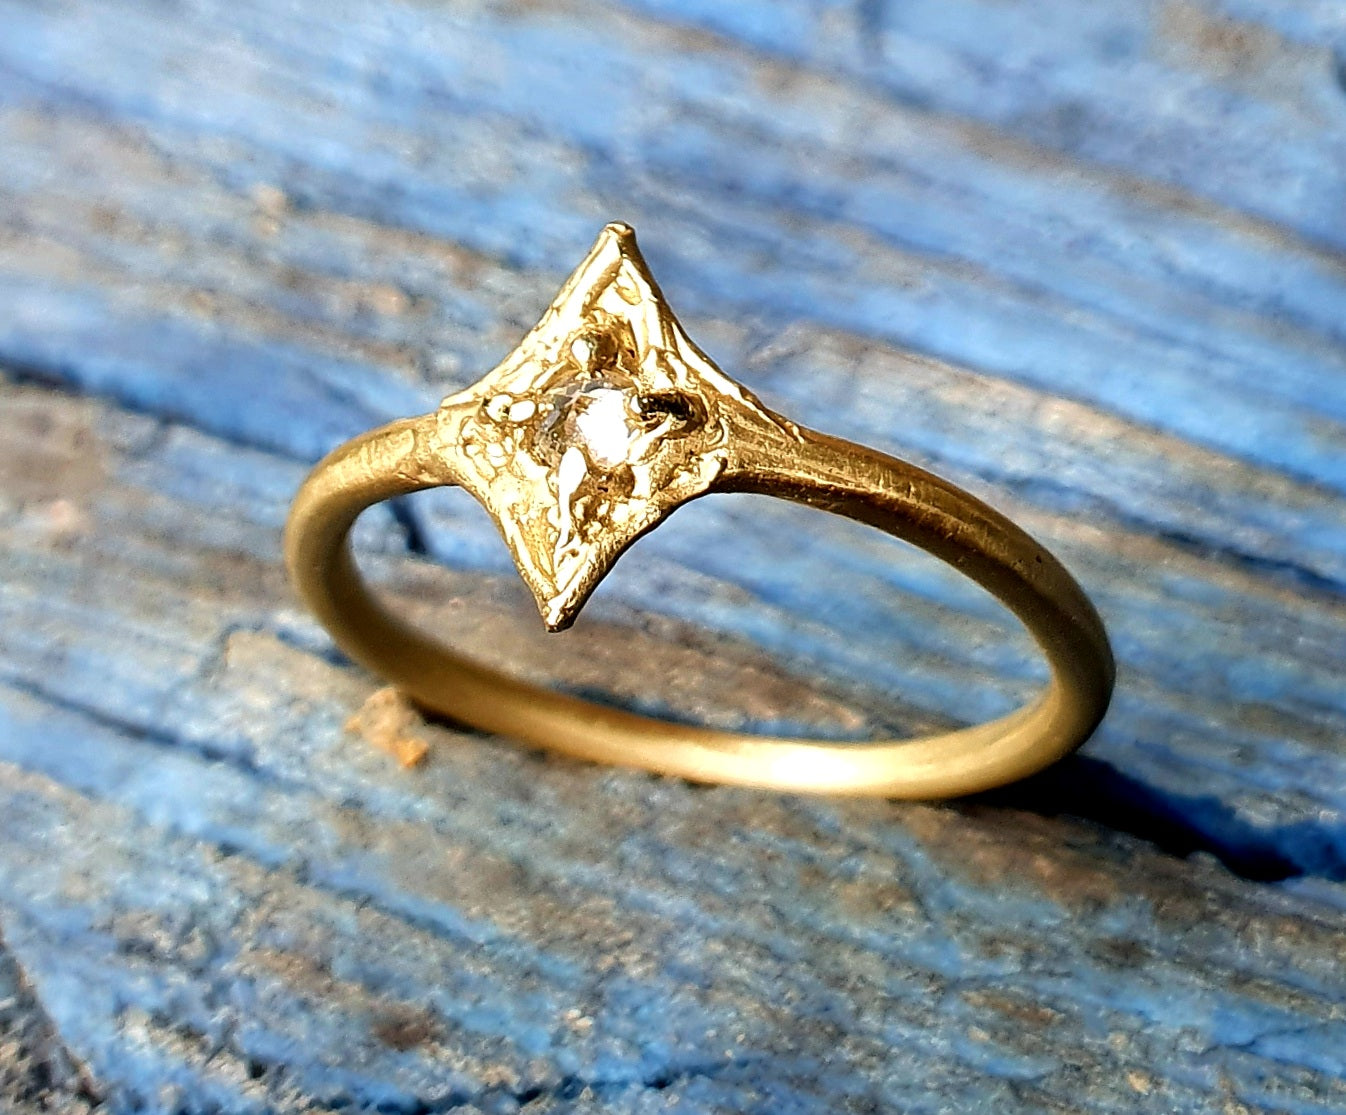 Pulsar Ring - 9k gold and white sapphire ring